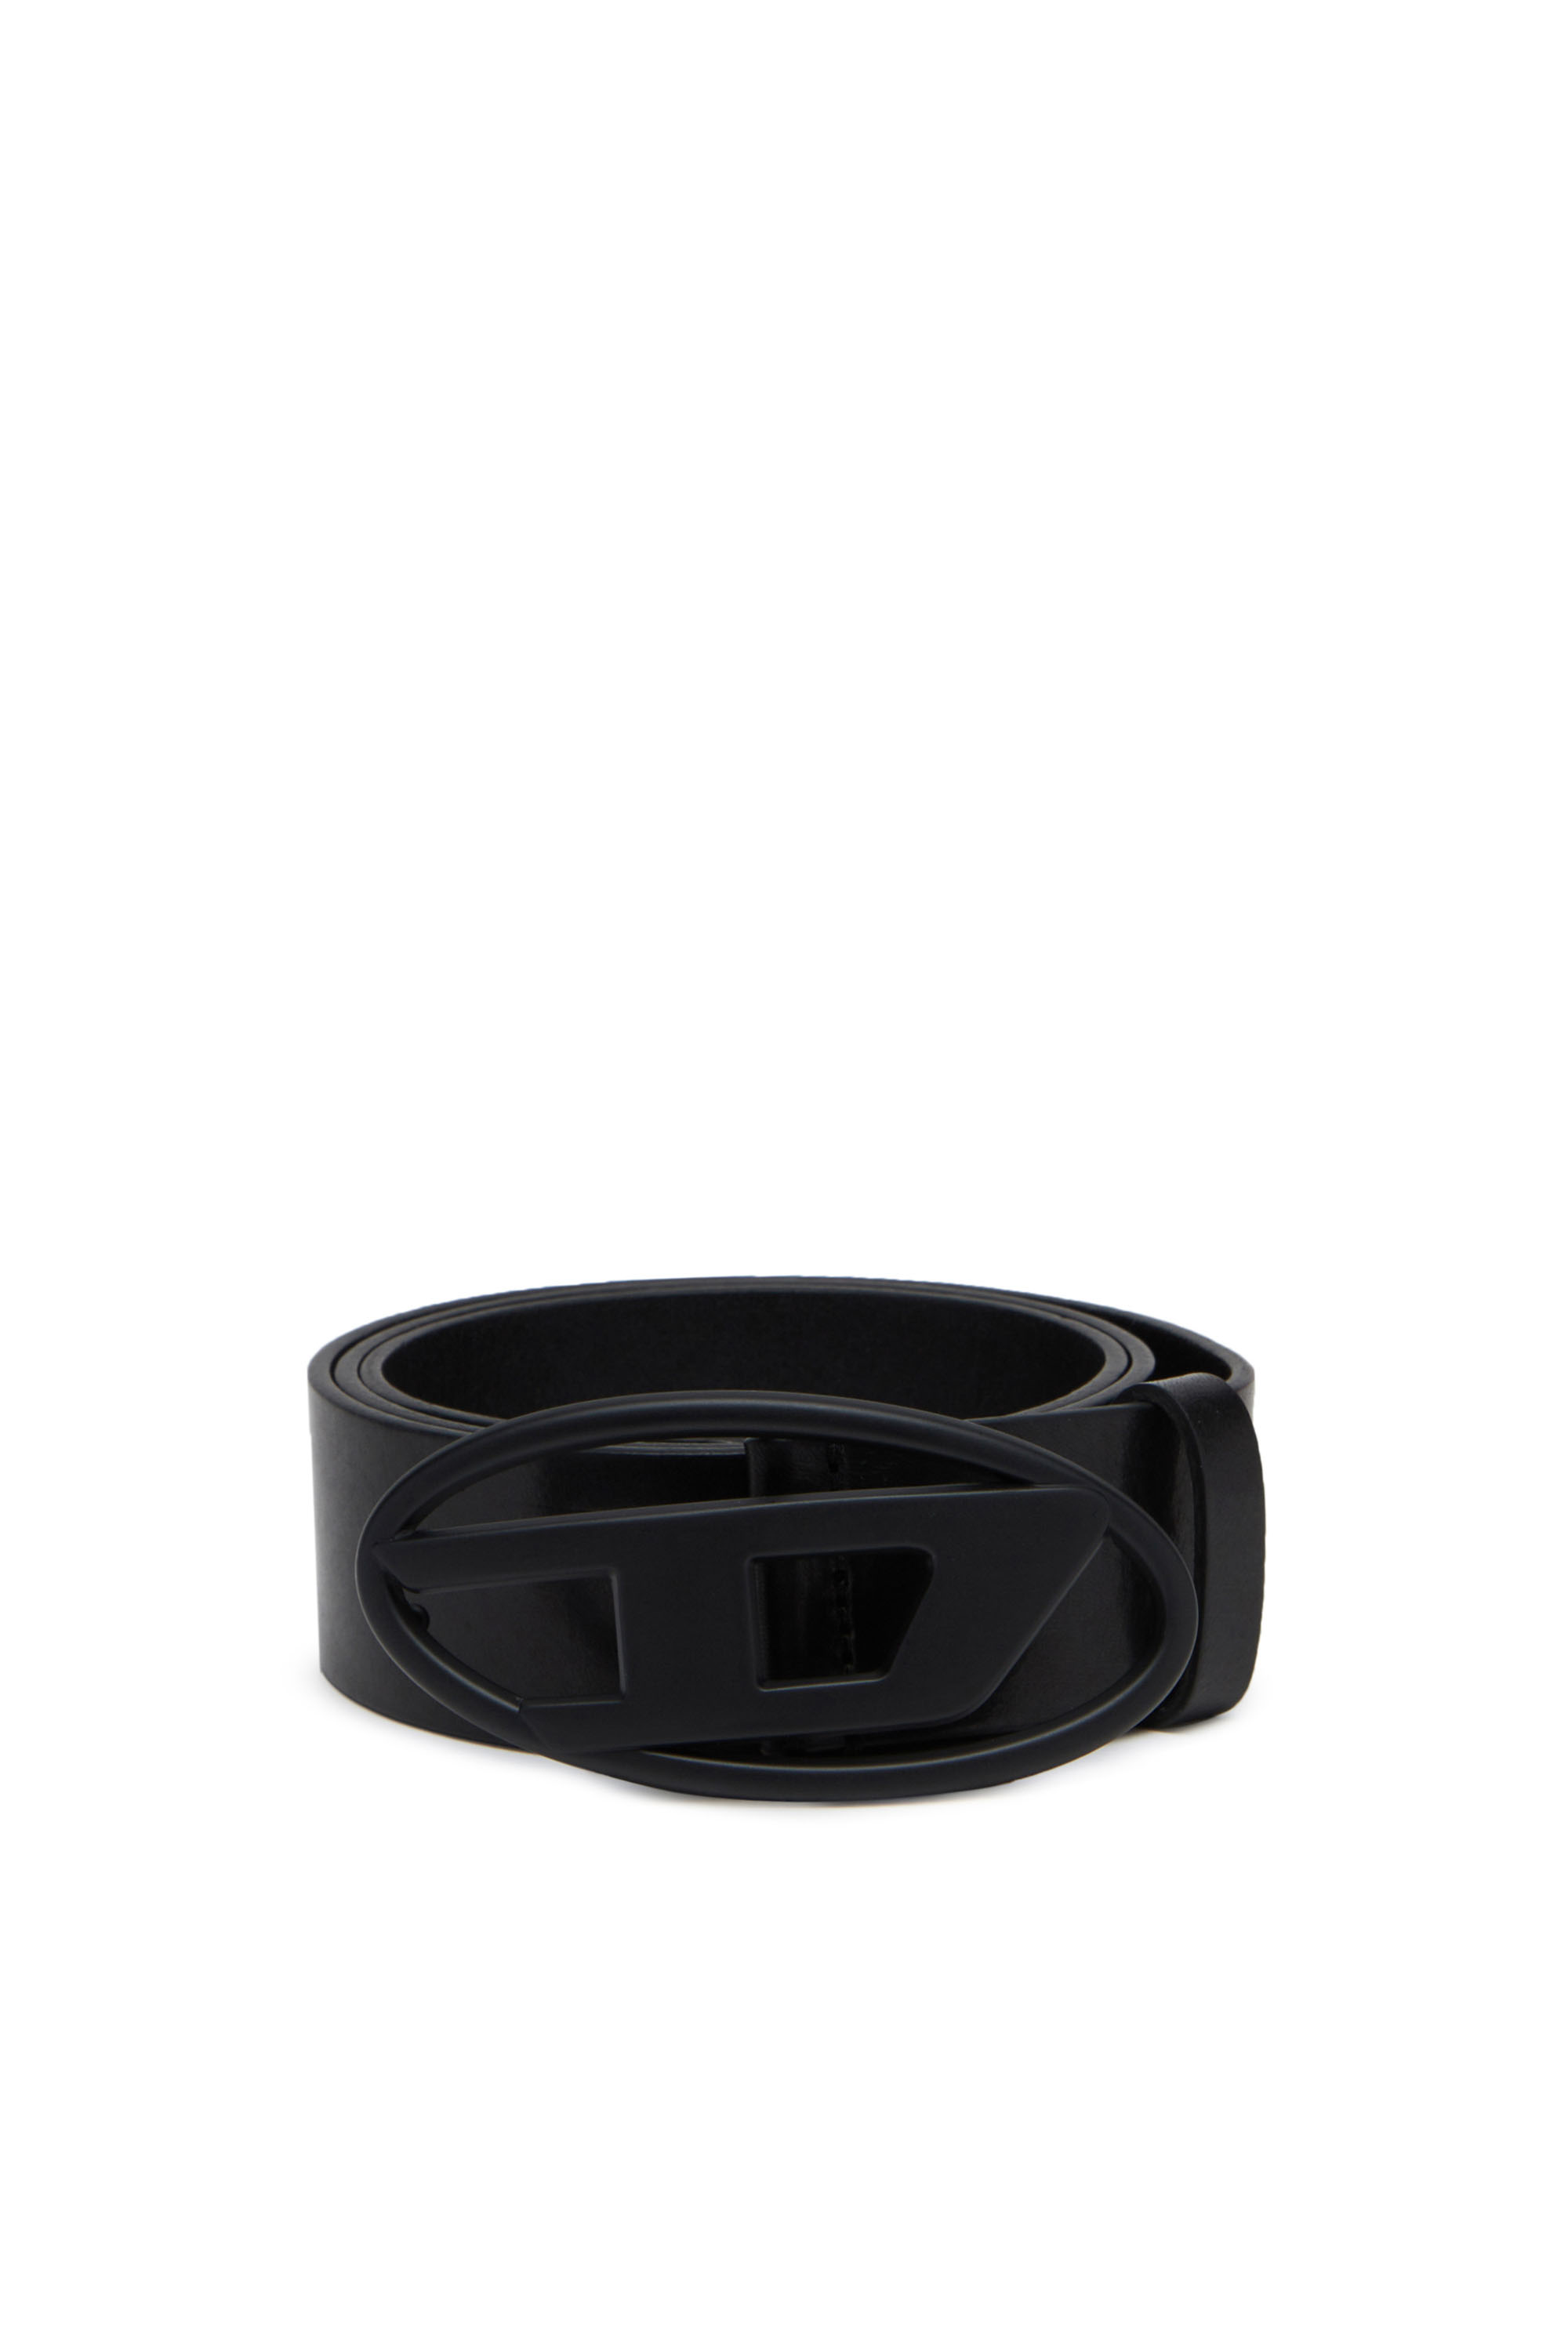 Diesel Leather Belt With Tonal Buckle